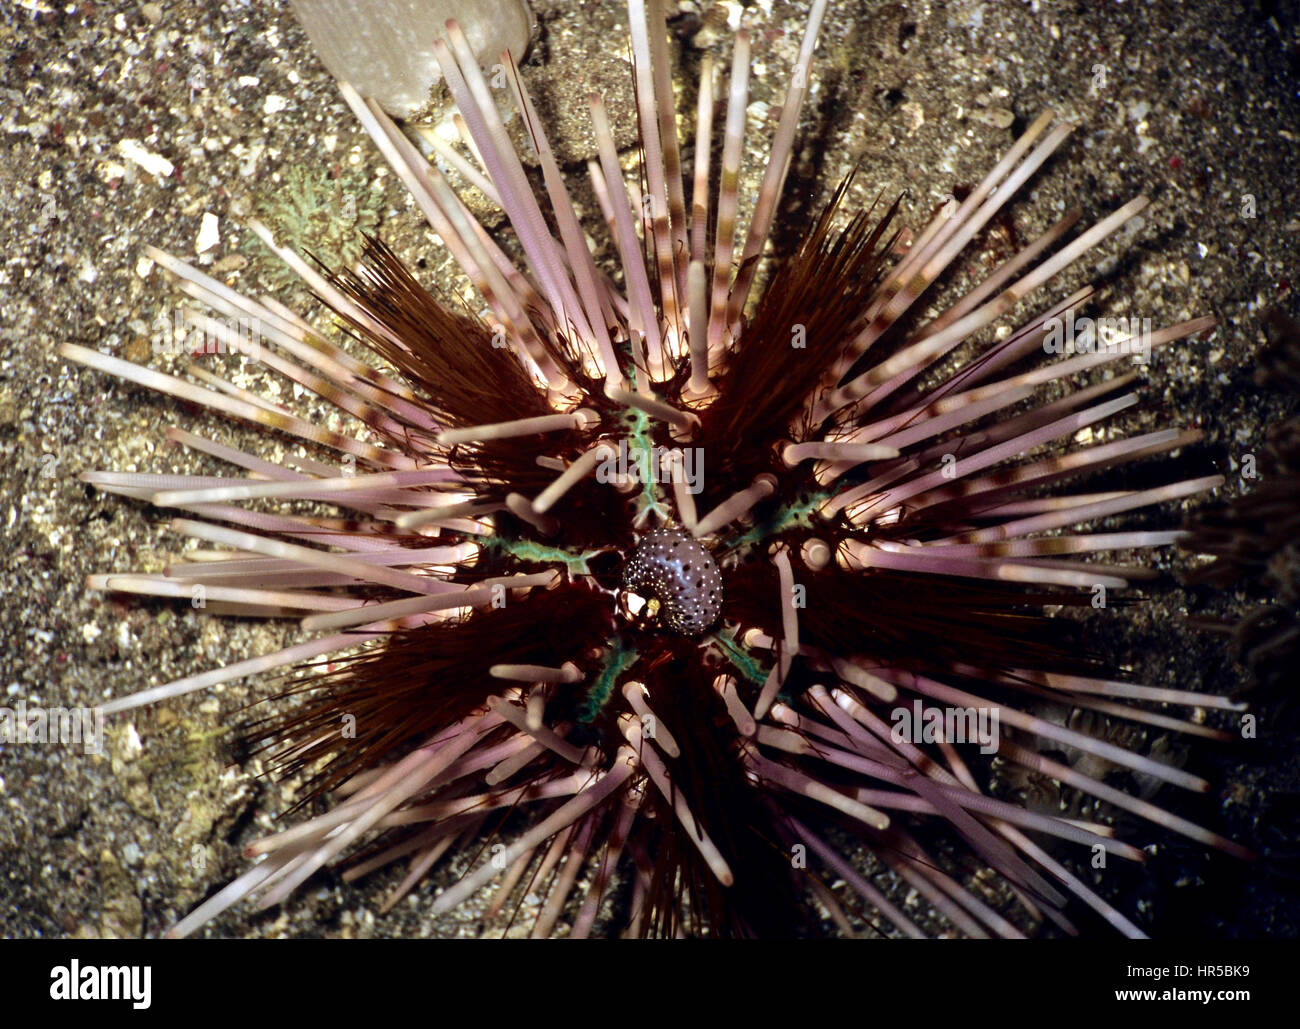 Double-spined sea urchin (Echinothrix calamaris). As is the case with all sea urchins, this species feeds on algae - mainly at night. Bali, Indonesia. Stock Photo